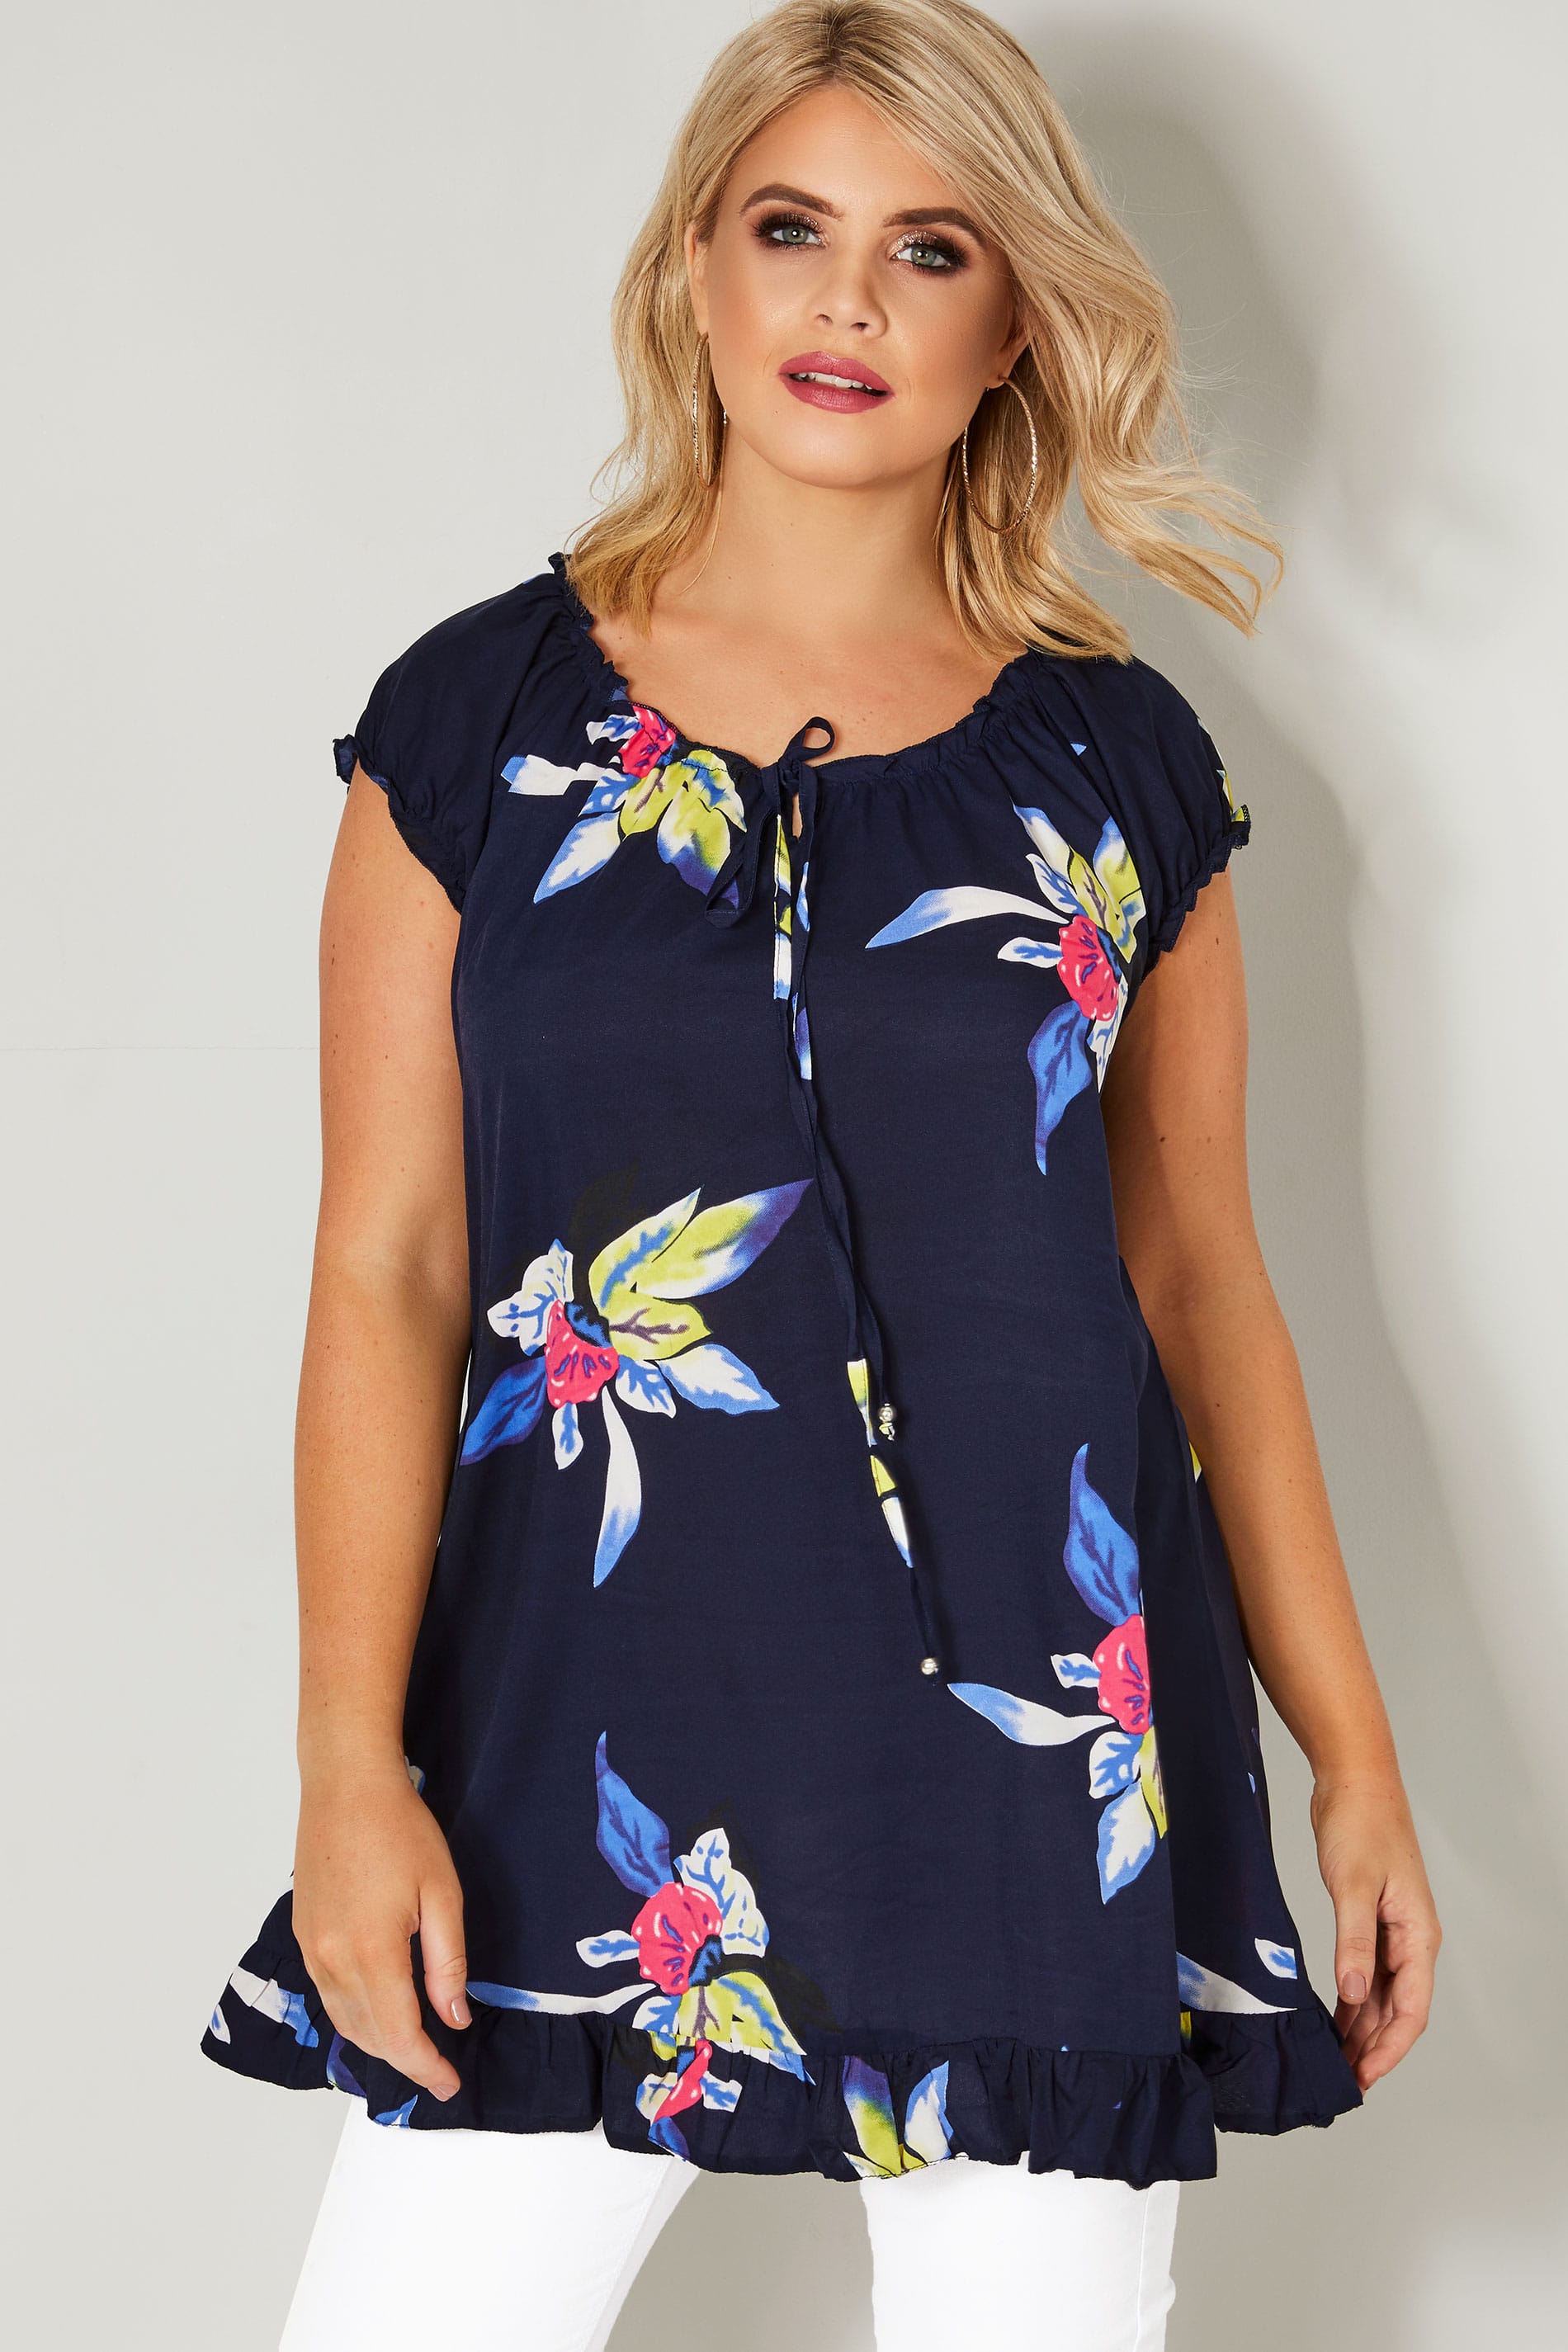 Navy & Multi Floral Print Gypsy Top With Frill Hem & Tie Neck, Plus ...